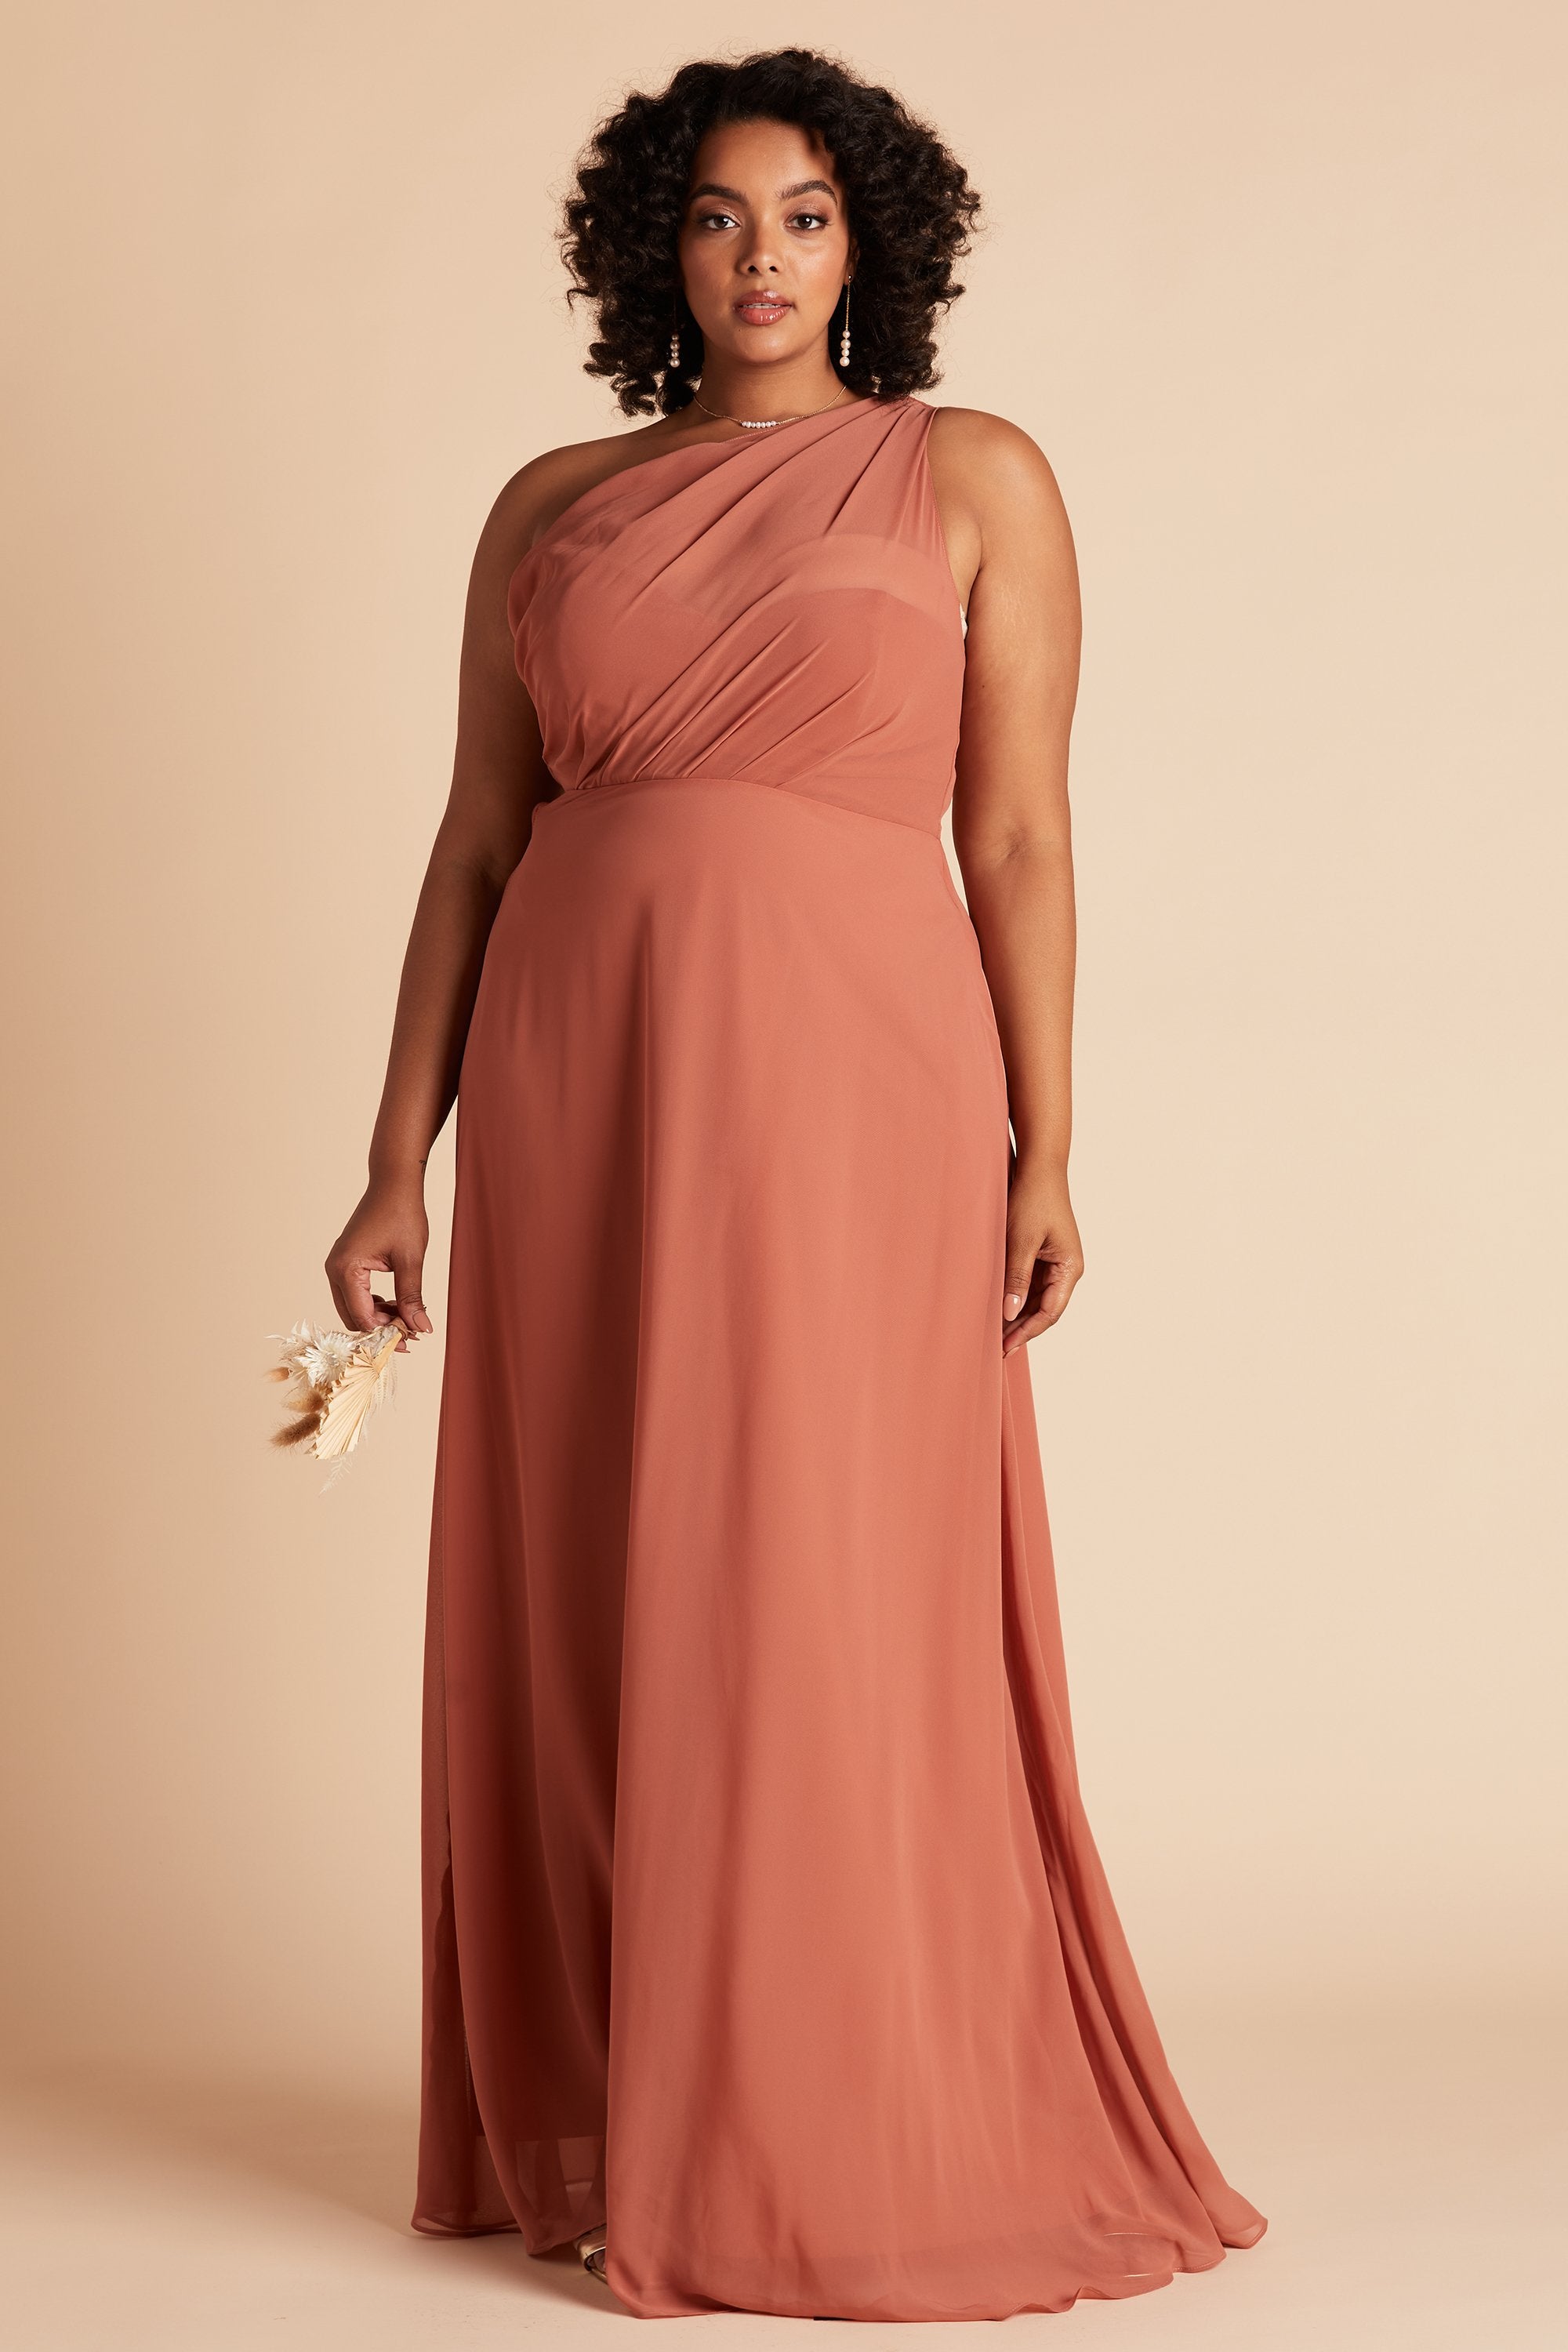 Front view of the Kira Dress Curve in terracotta chiffon without the optional slit shows a full-figured model with a medium skin tone. The asymmetrical, chiffon one-shoulder bodice wraps across their full bosom. Soft pleating gathers at the left shoulder of the bodice with a smooth fit at the waist as the dress skirt flows to the floor.